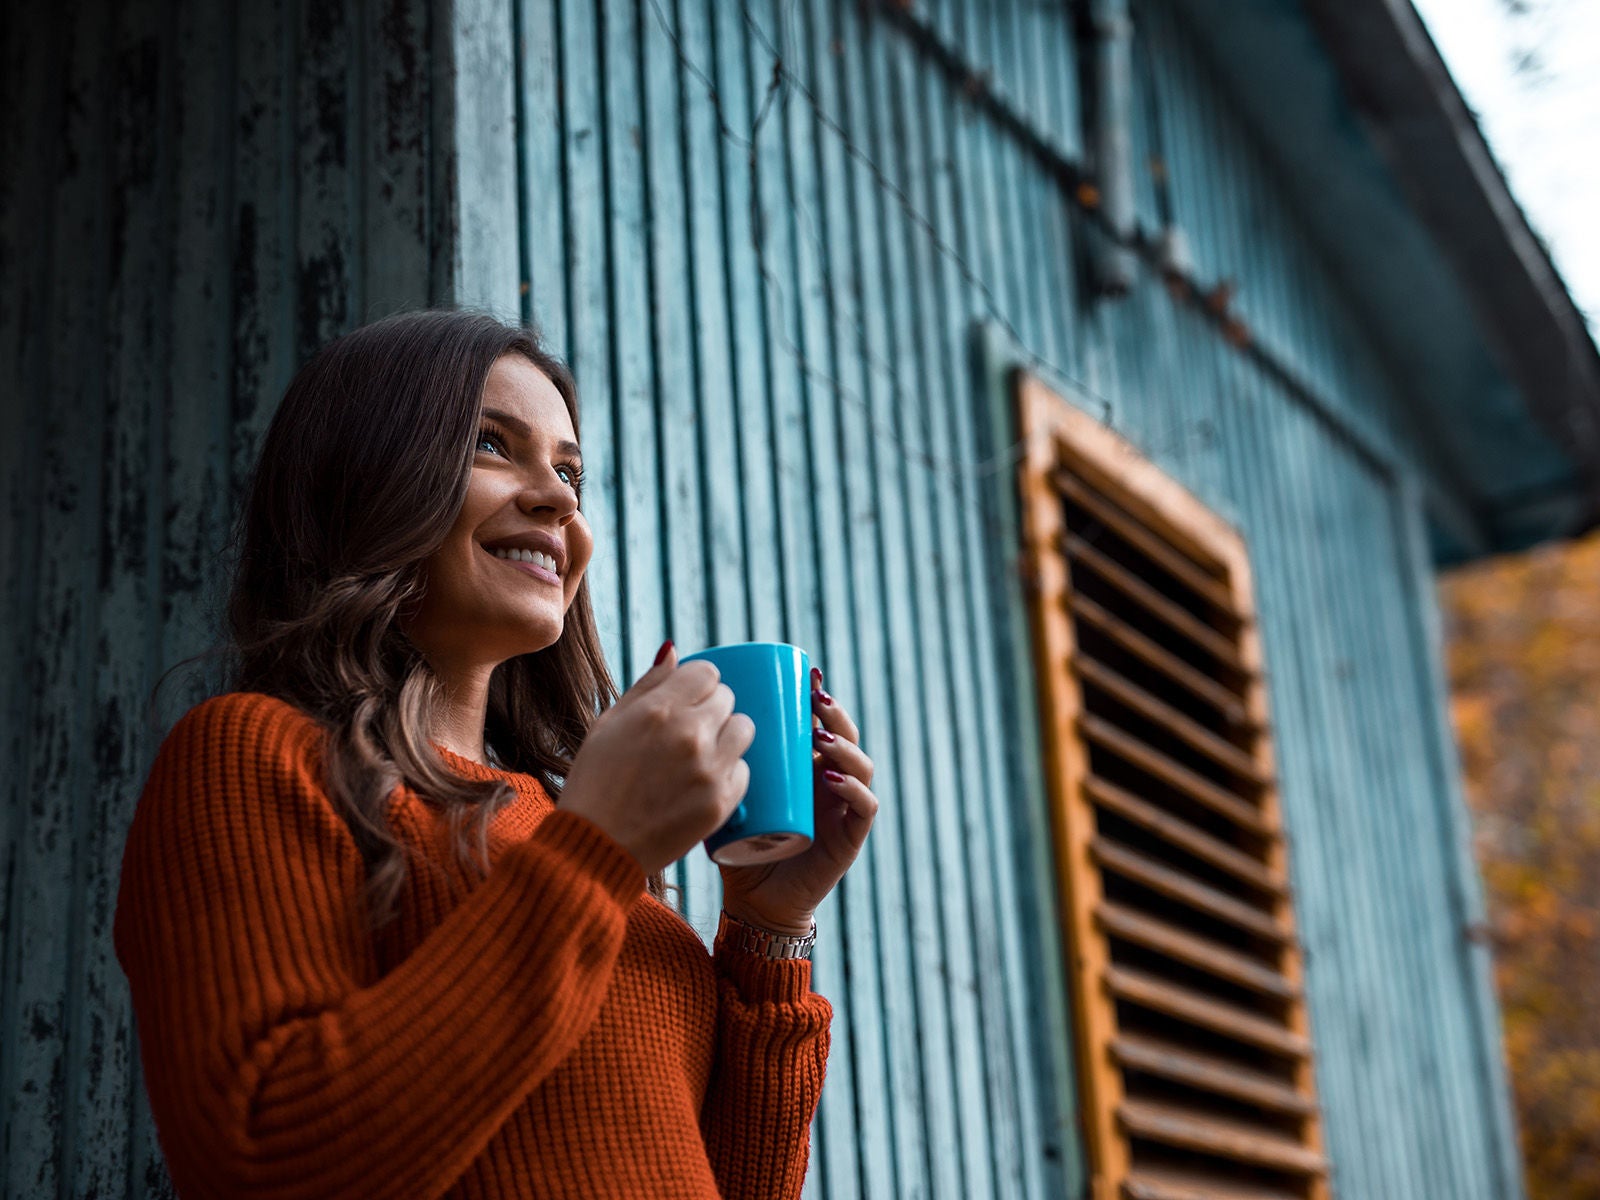 Smiling, relaxed-looking woman holding a coffee mug, standing next to a blue wooden house.